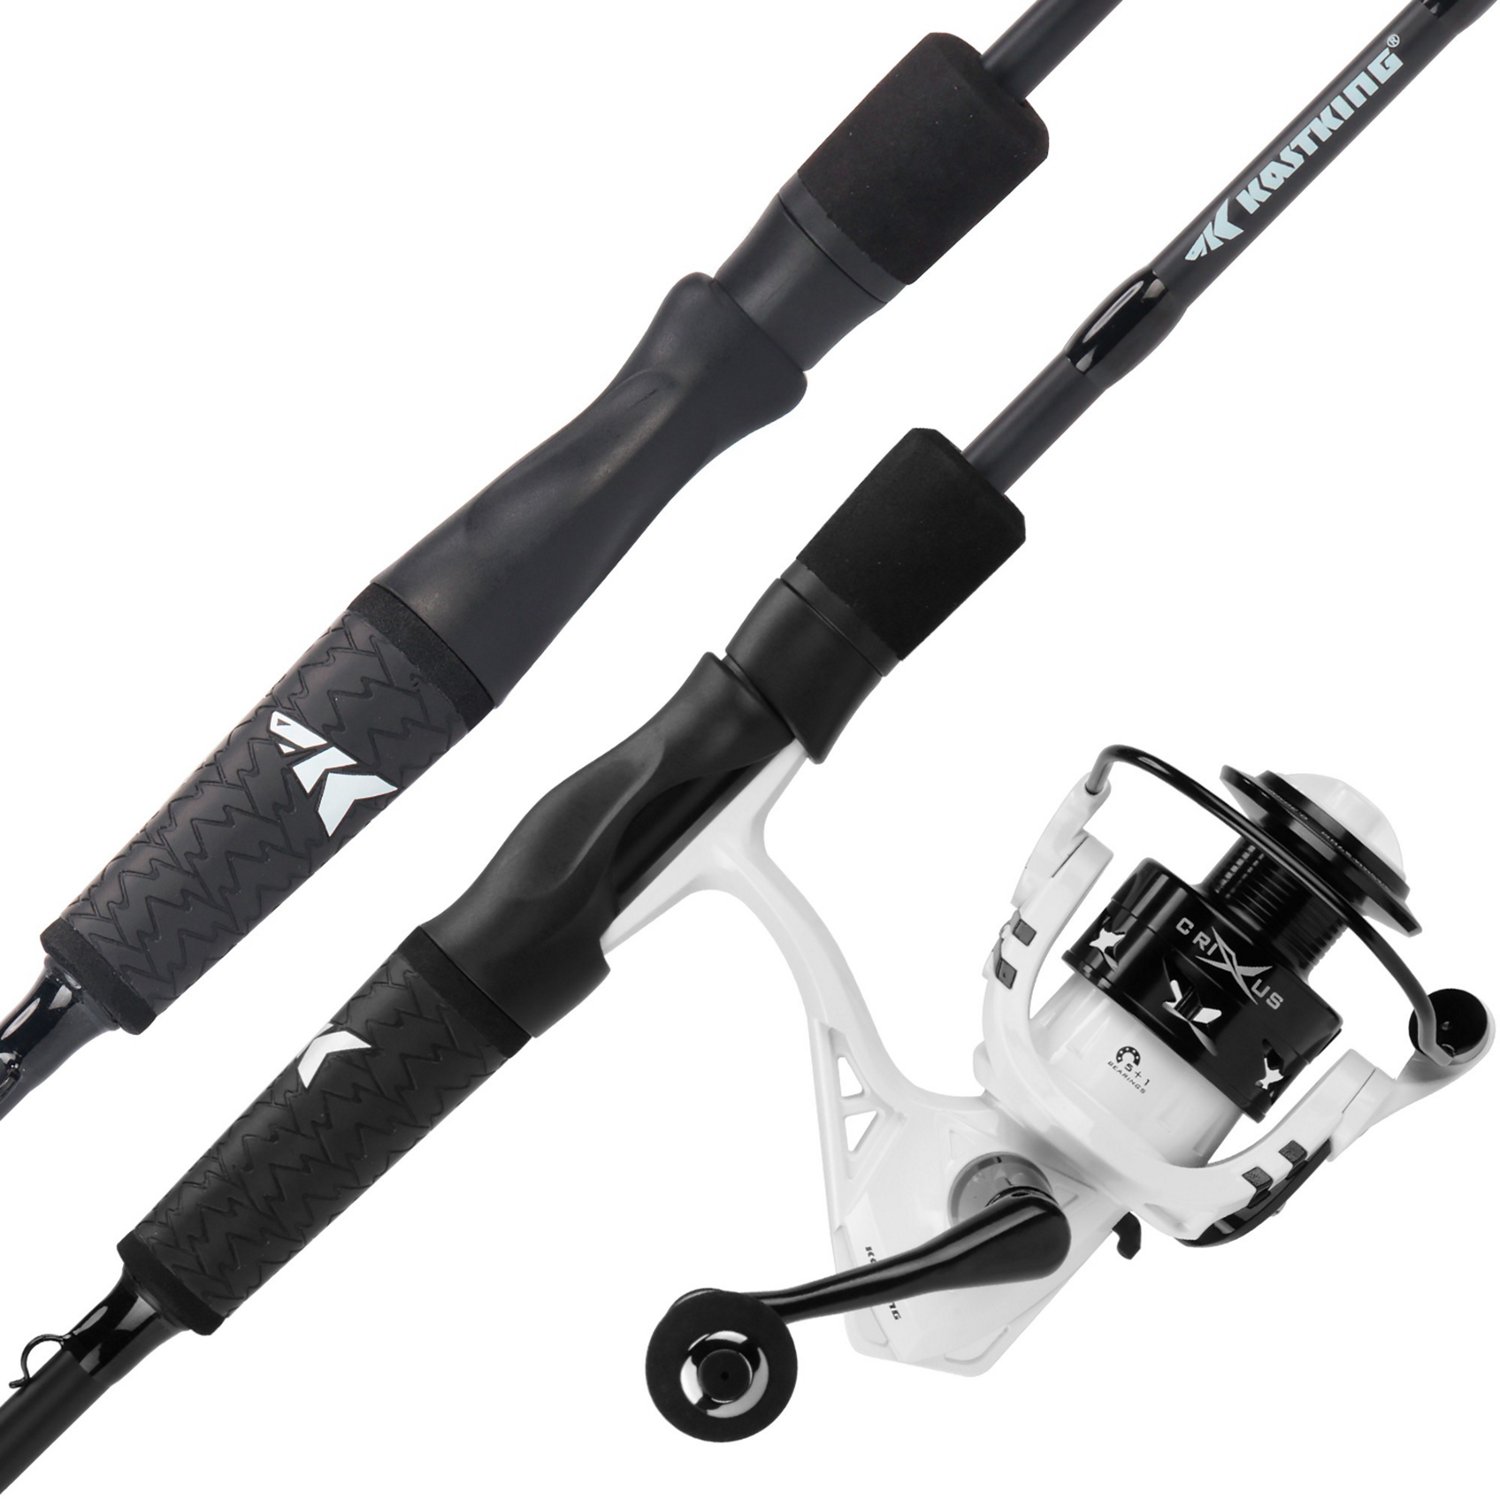 Academy Sports + Outdoors KastKing Crixus Spinning 5 ft 6 in - 6